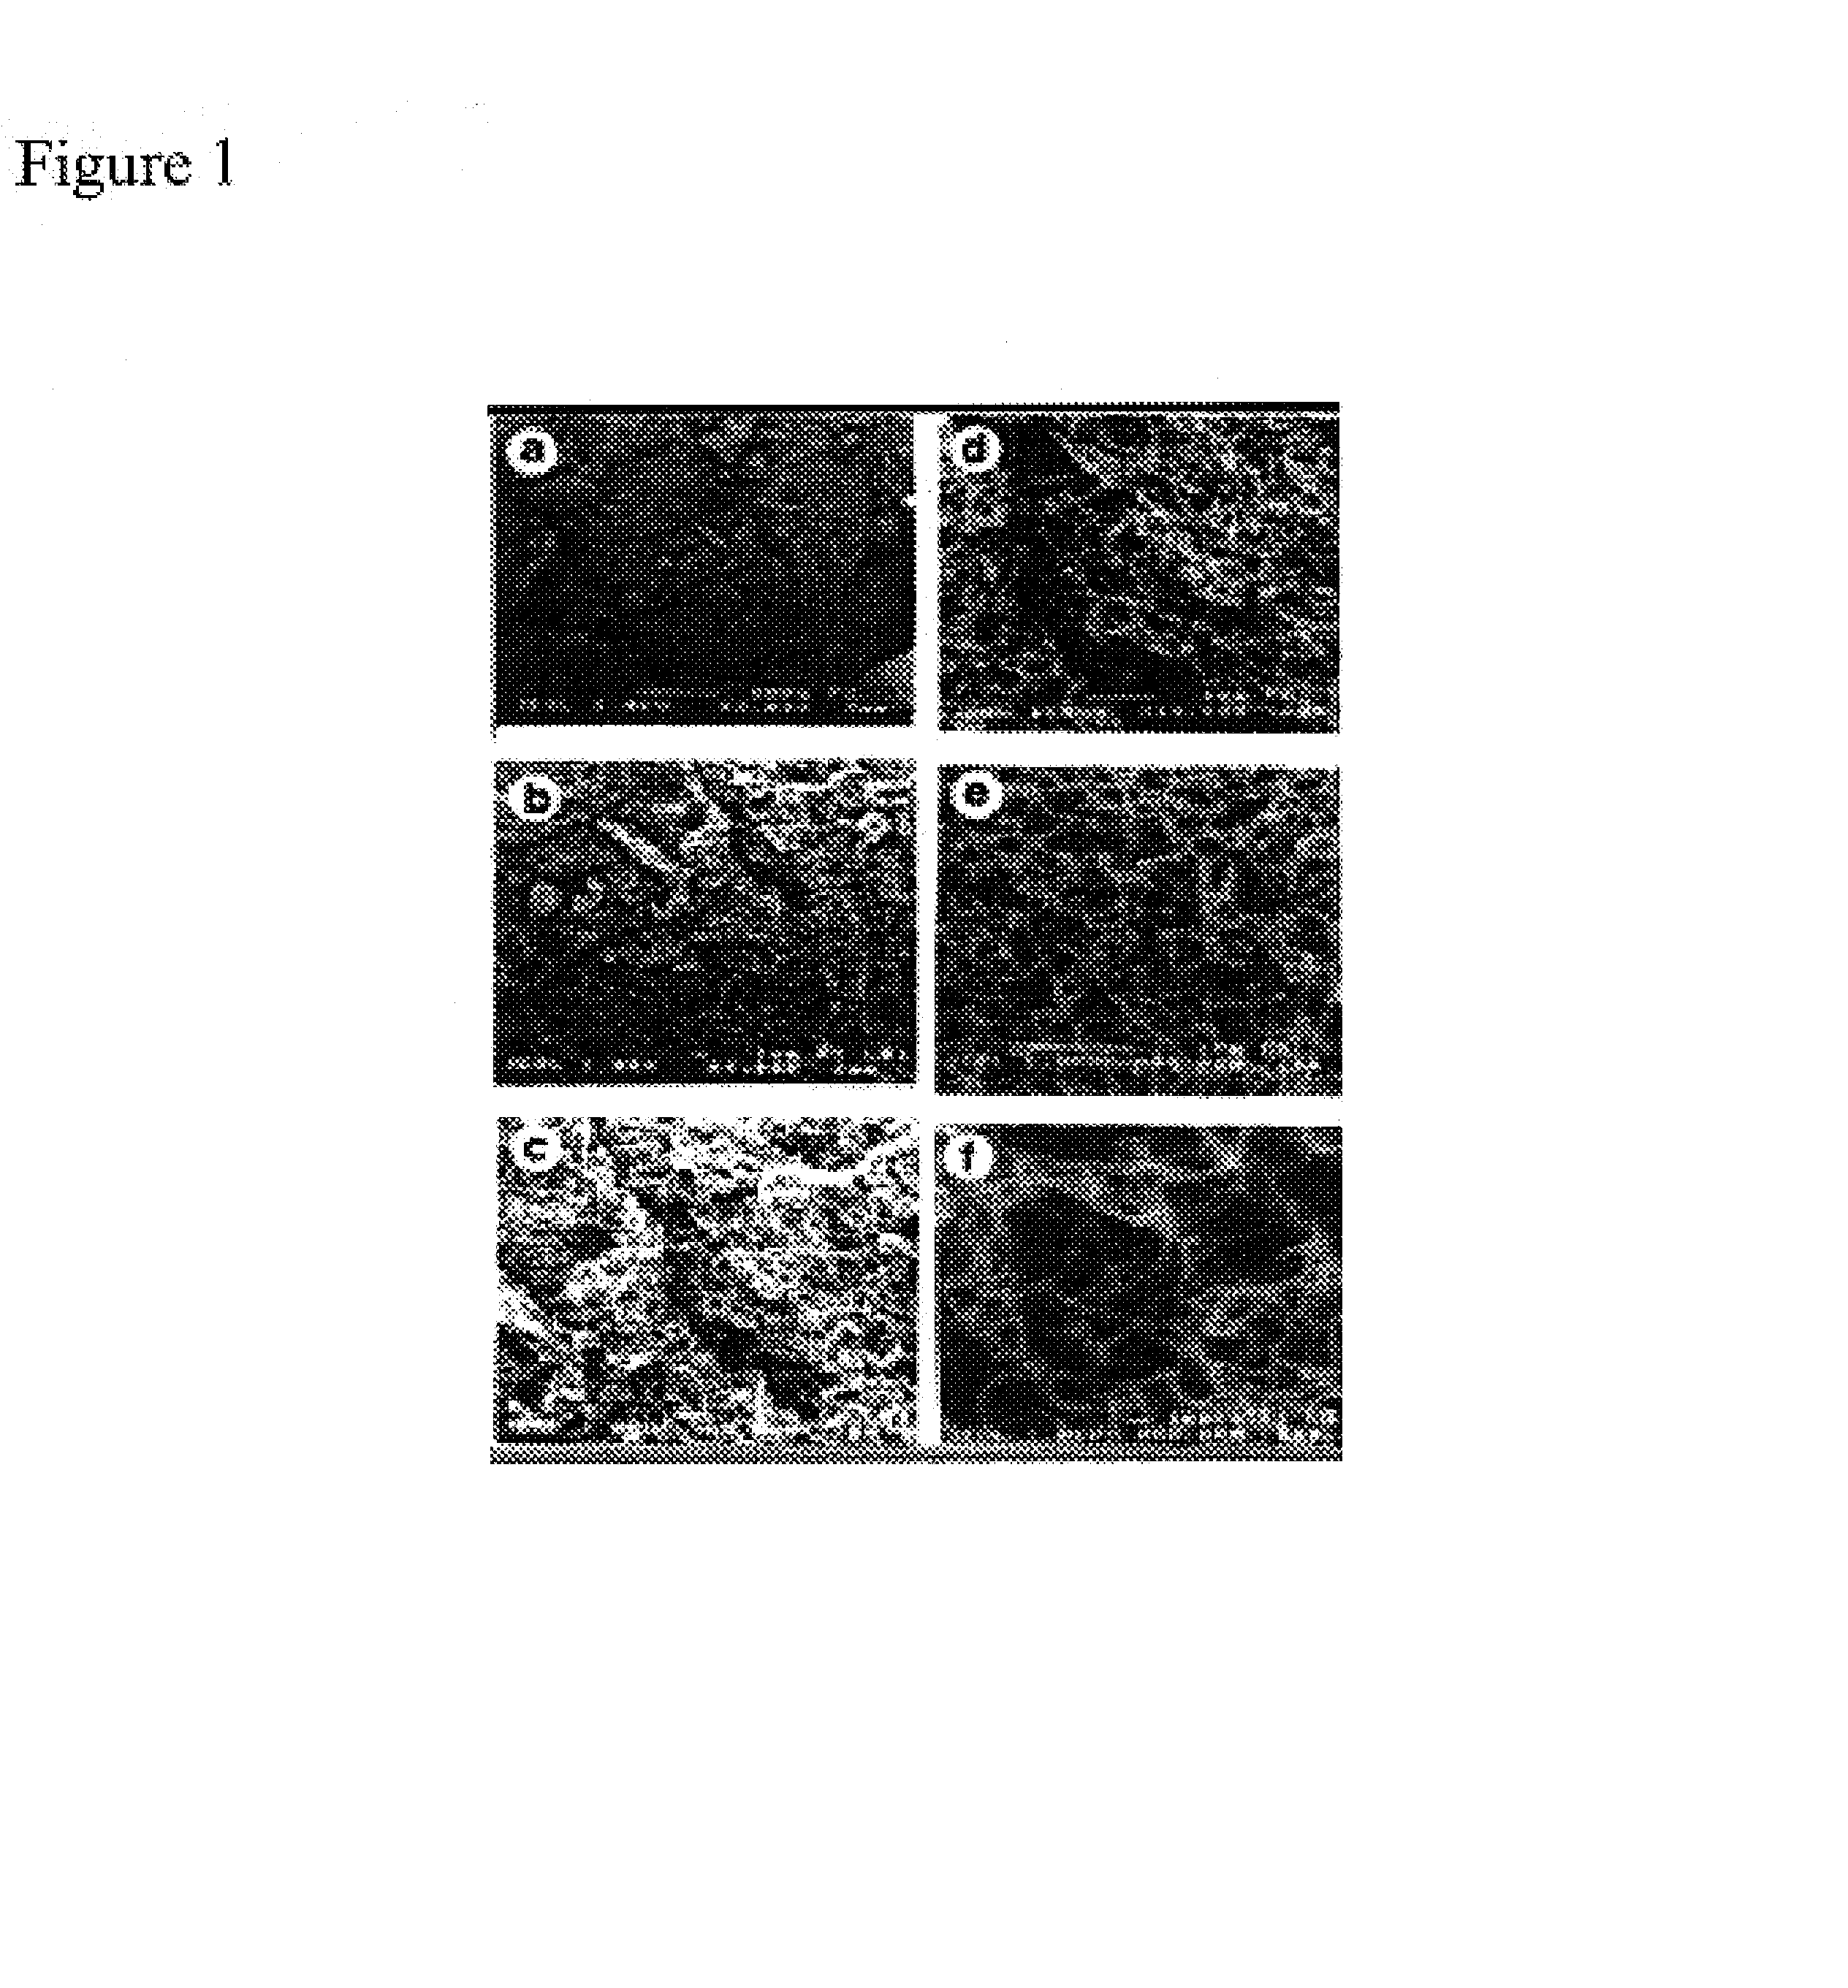 Self-assembling peptides incorporating modifications and methods of use thereof